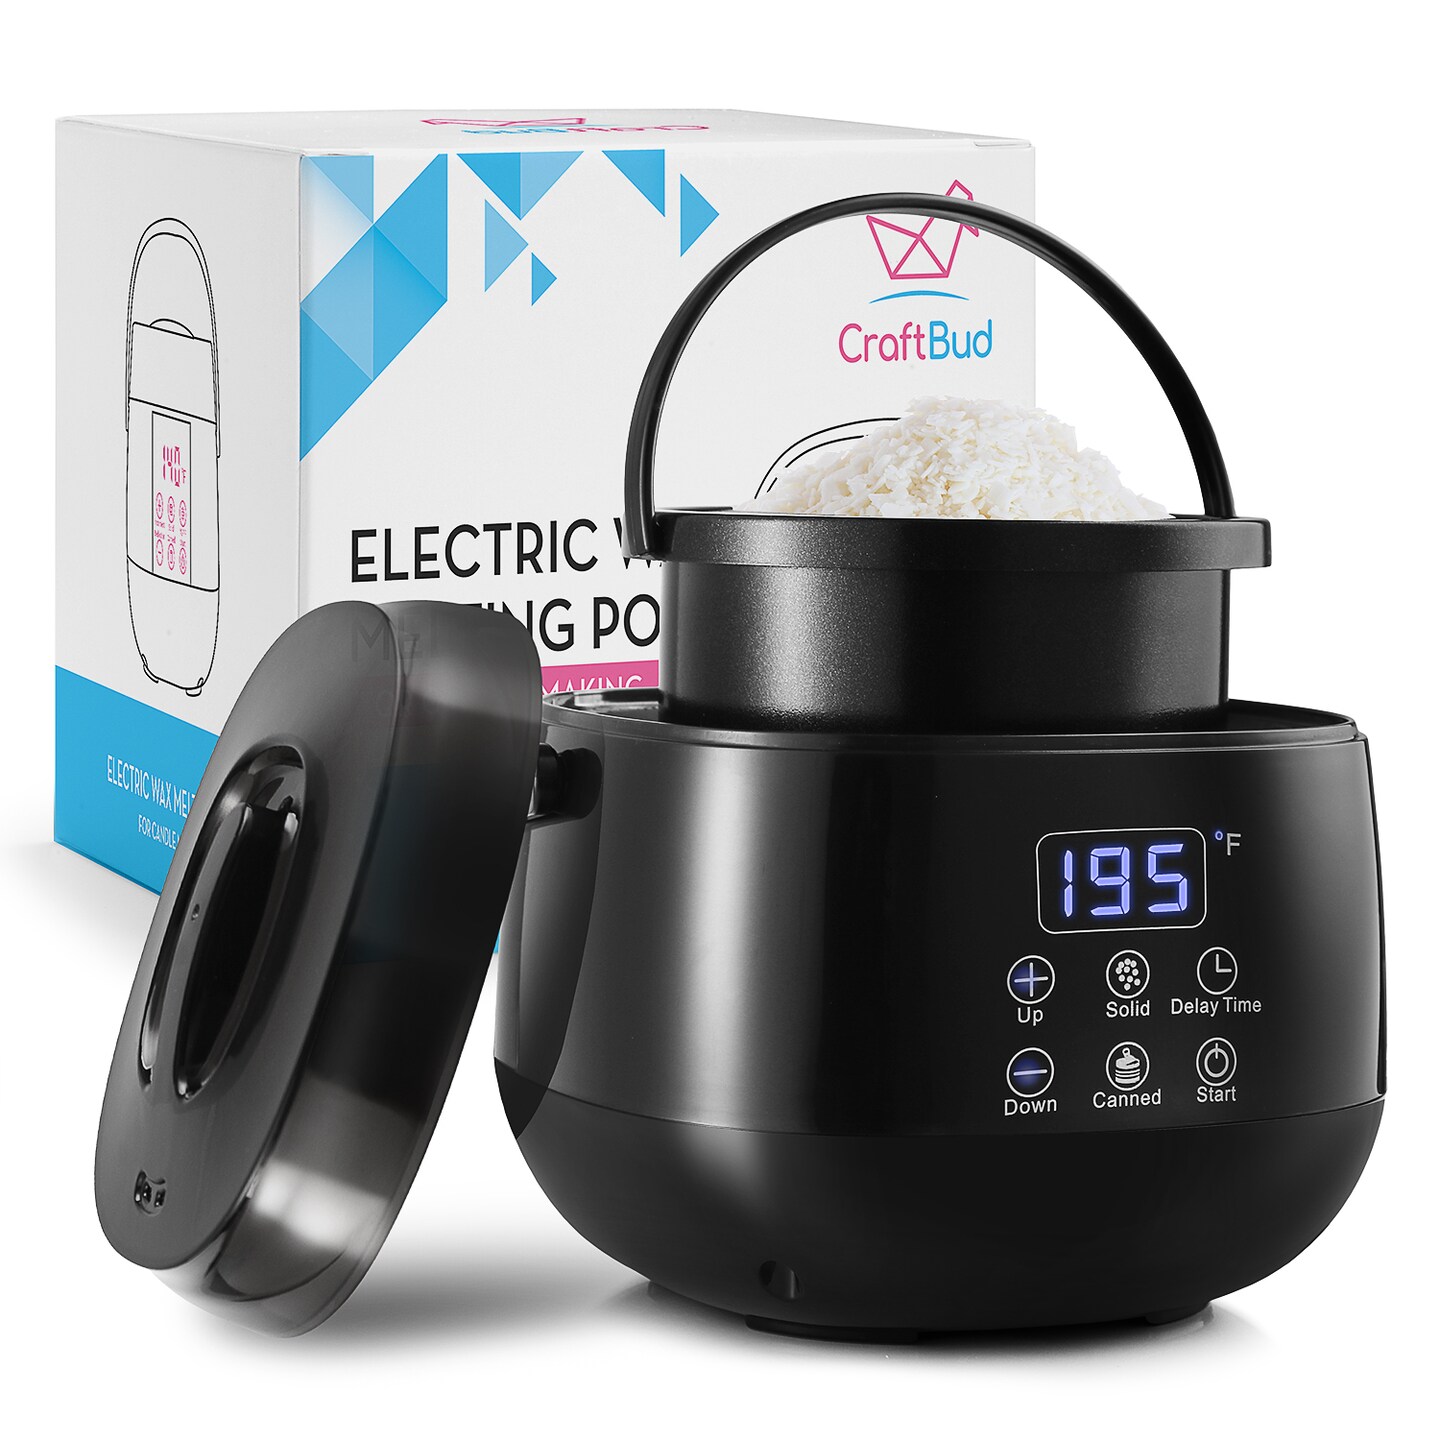 Electric Wax Melter/wax Melting With Spout/5 Quarts/8 Pounds of